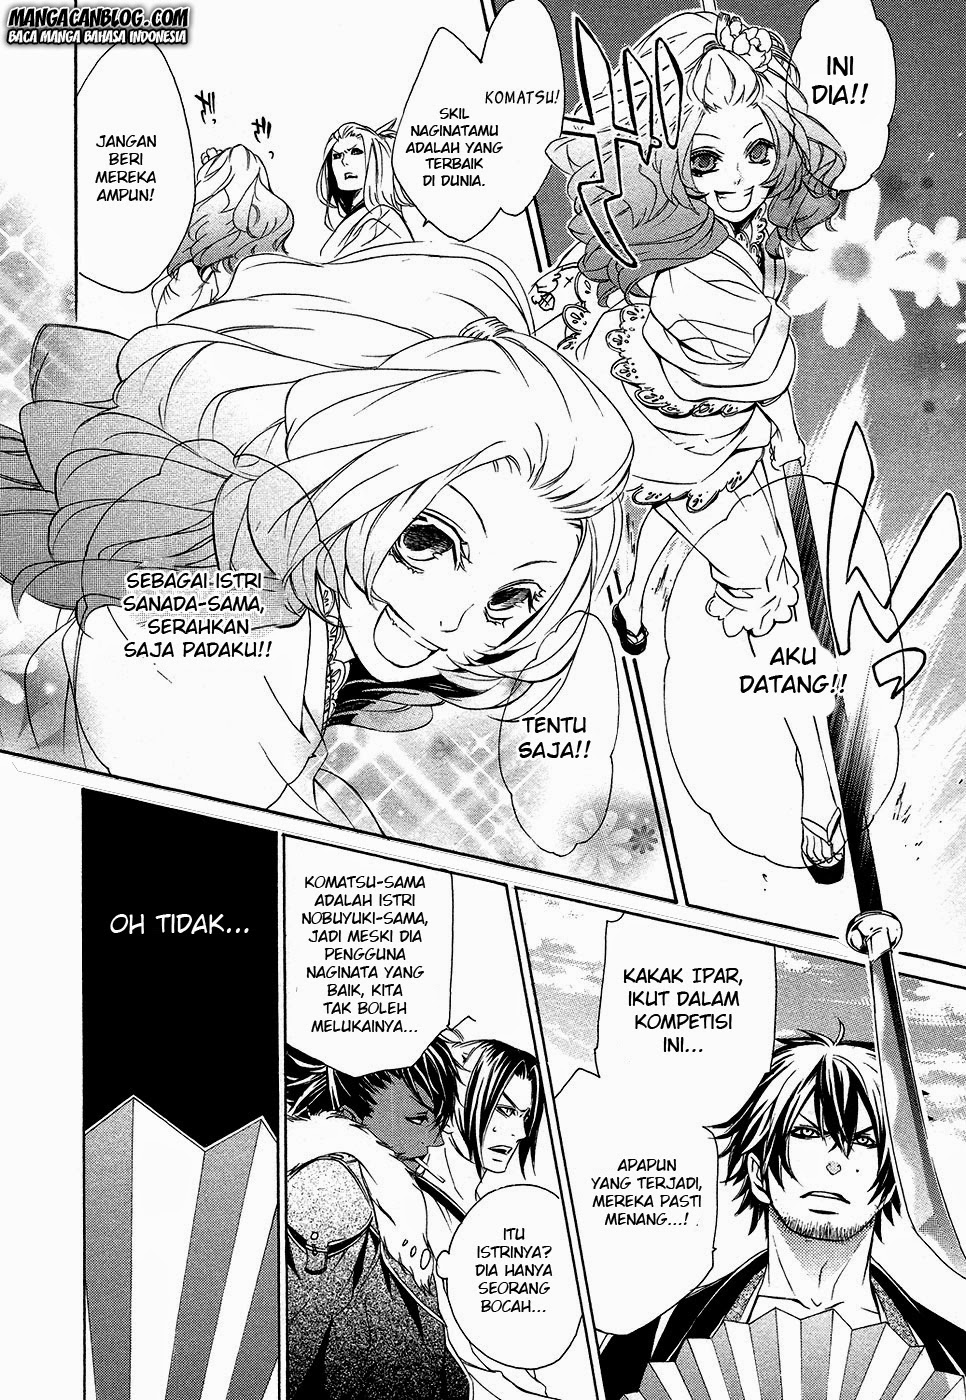 Brave 10 S Chapter 4